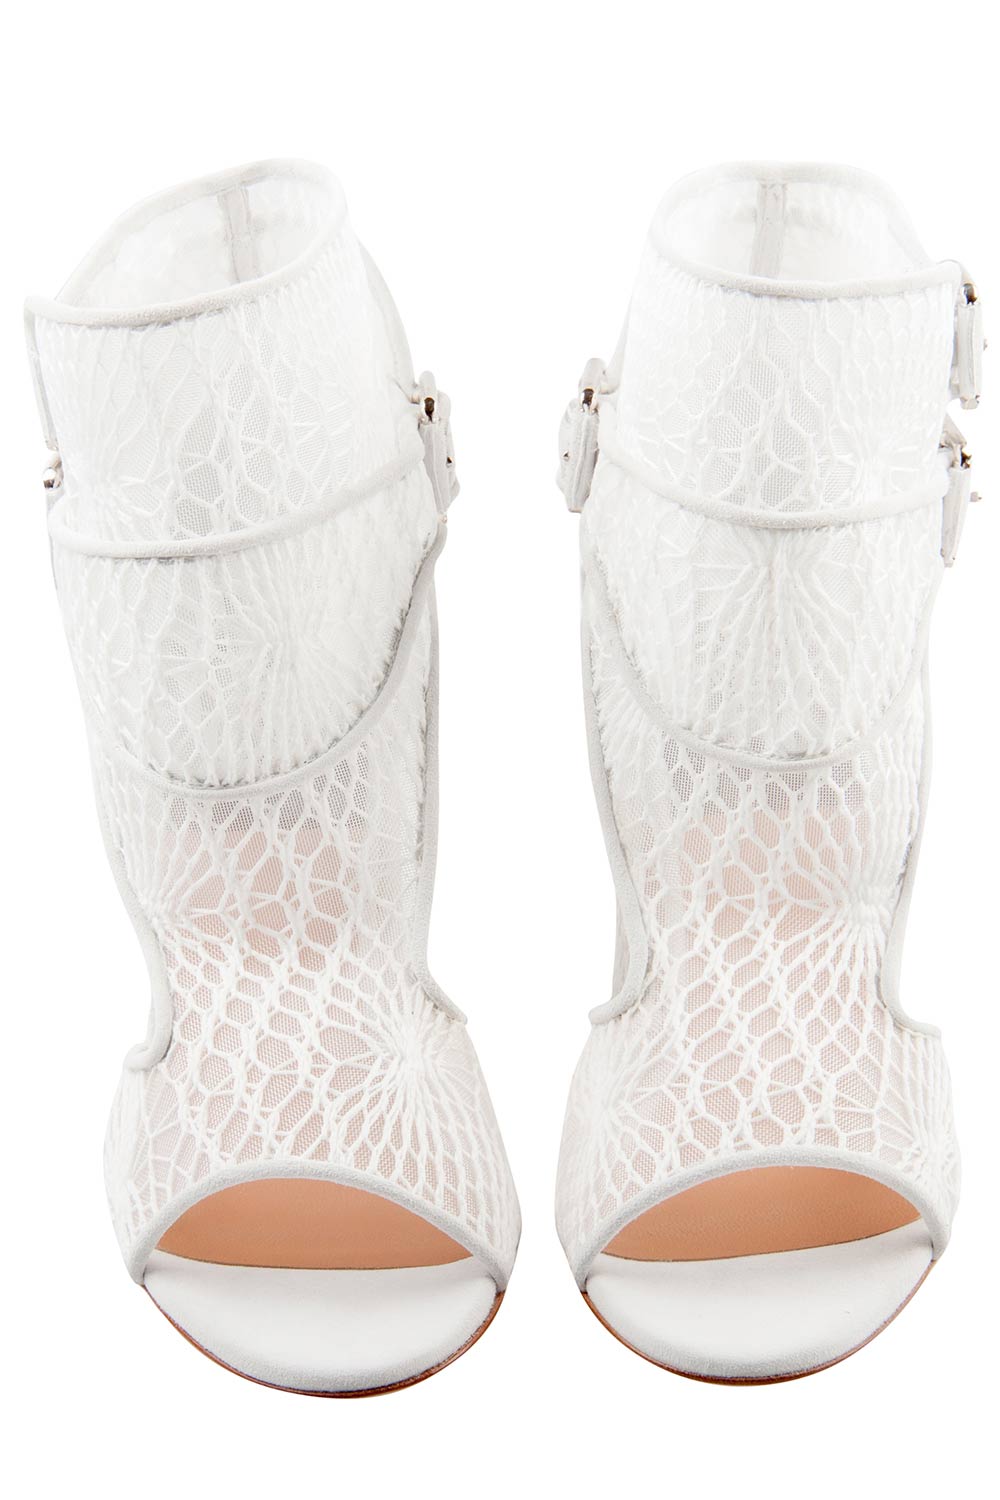 

Laurence Dacade White Lace And Suede Rush Macrame Cut Out Open Toe Booties Size